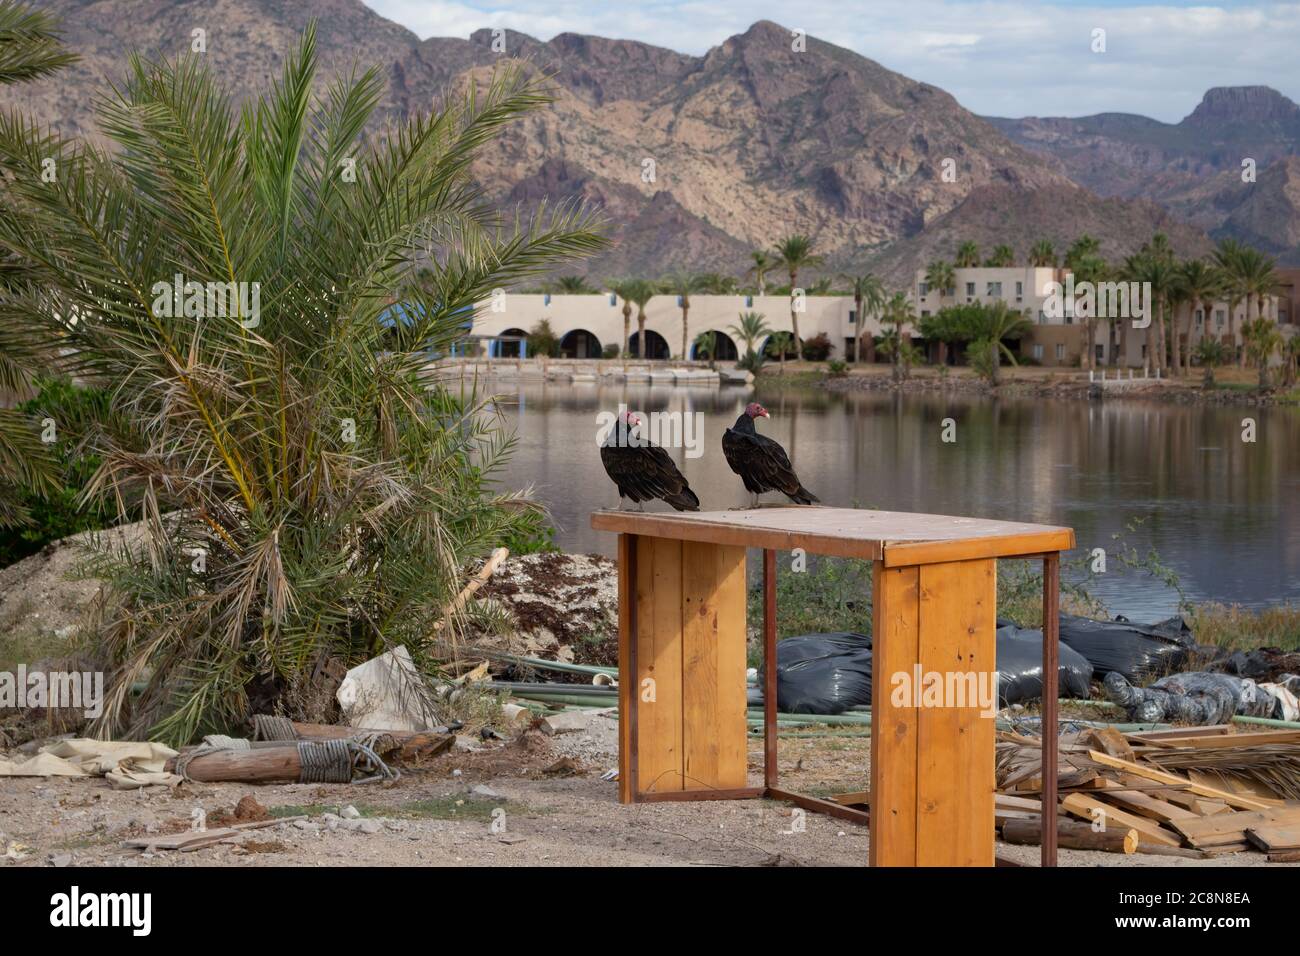 Two vultures sit atop a piece of furniture thrown in the trash that litters the ground in San Carlos, Sonora, Mexico. Stock Photo